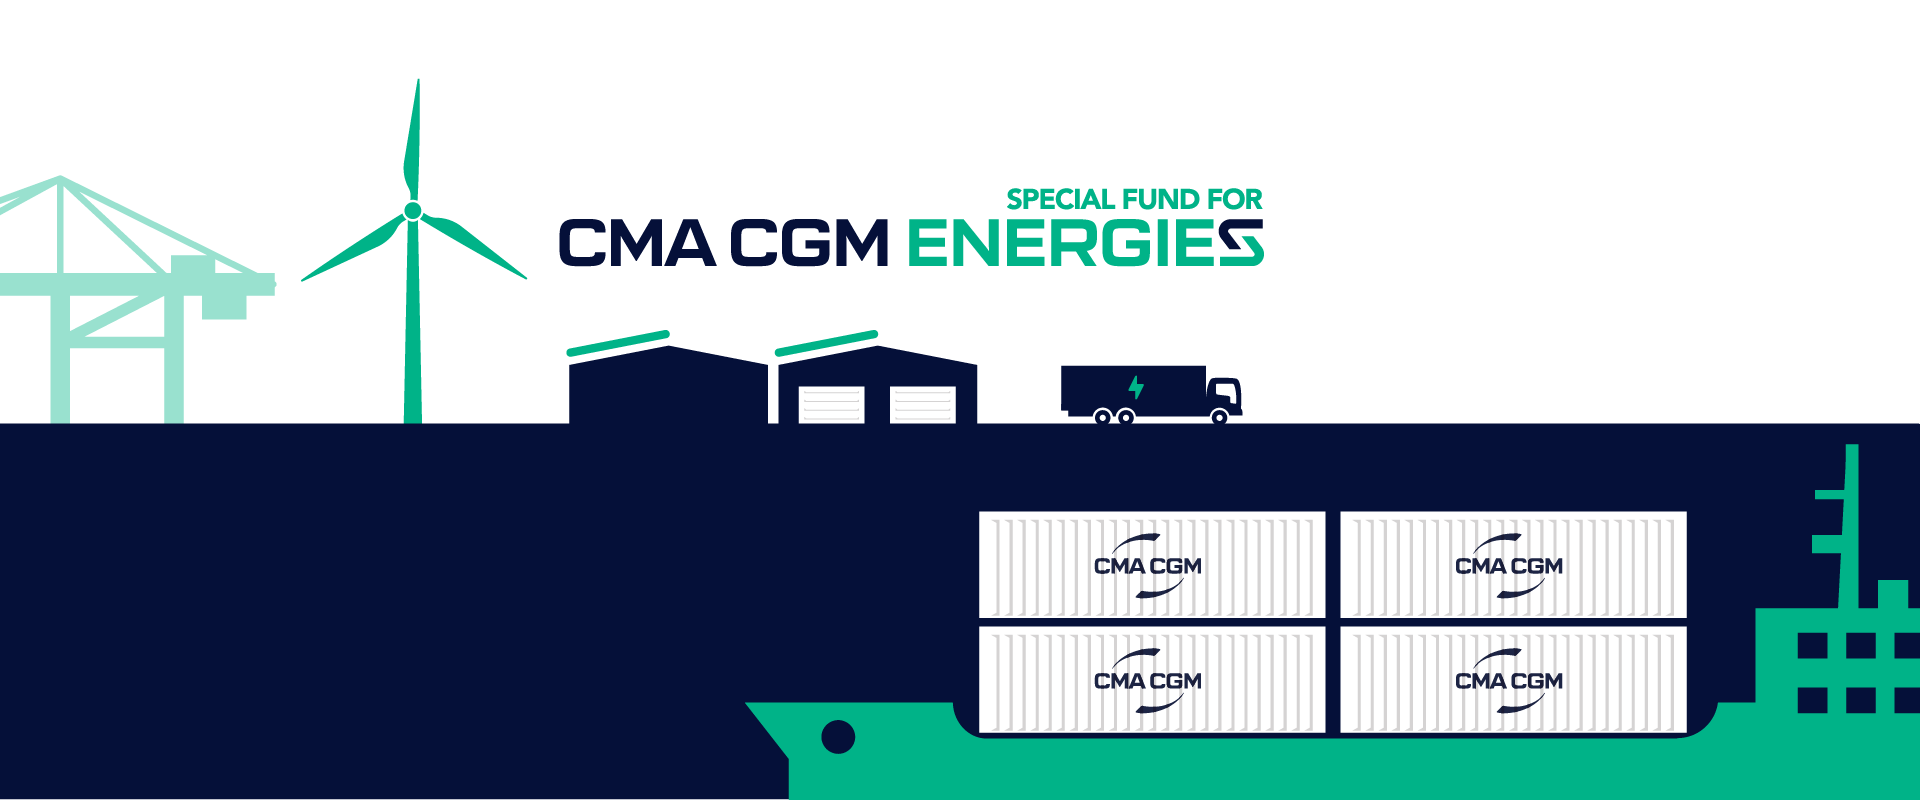 CMA CGM - As a global player in sea, land, air, and logistics solutions